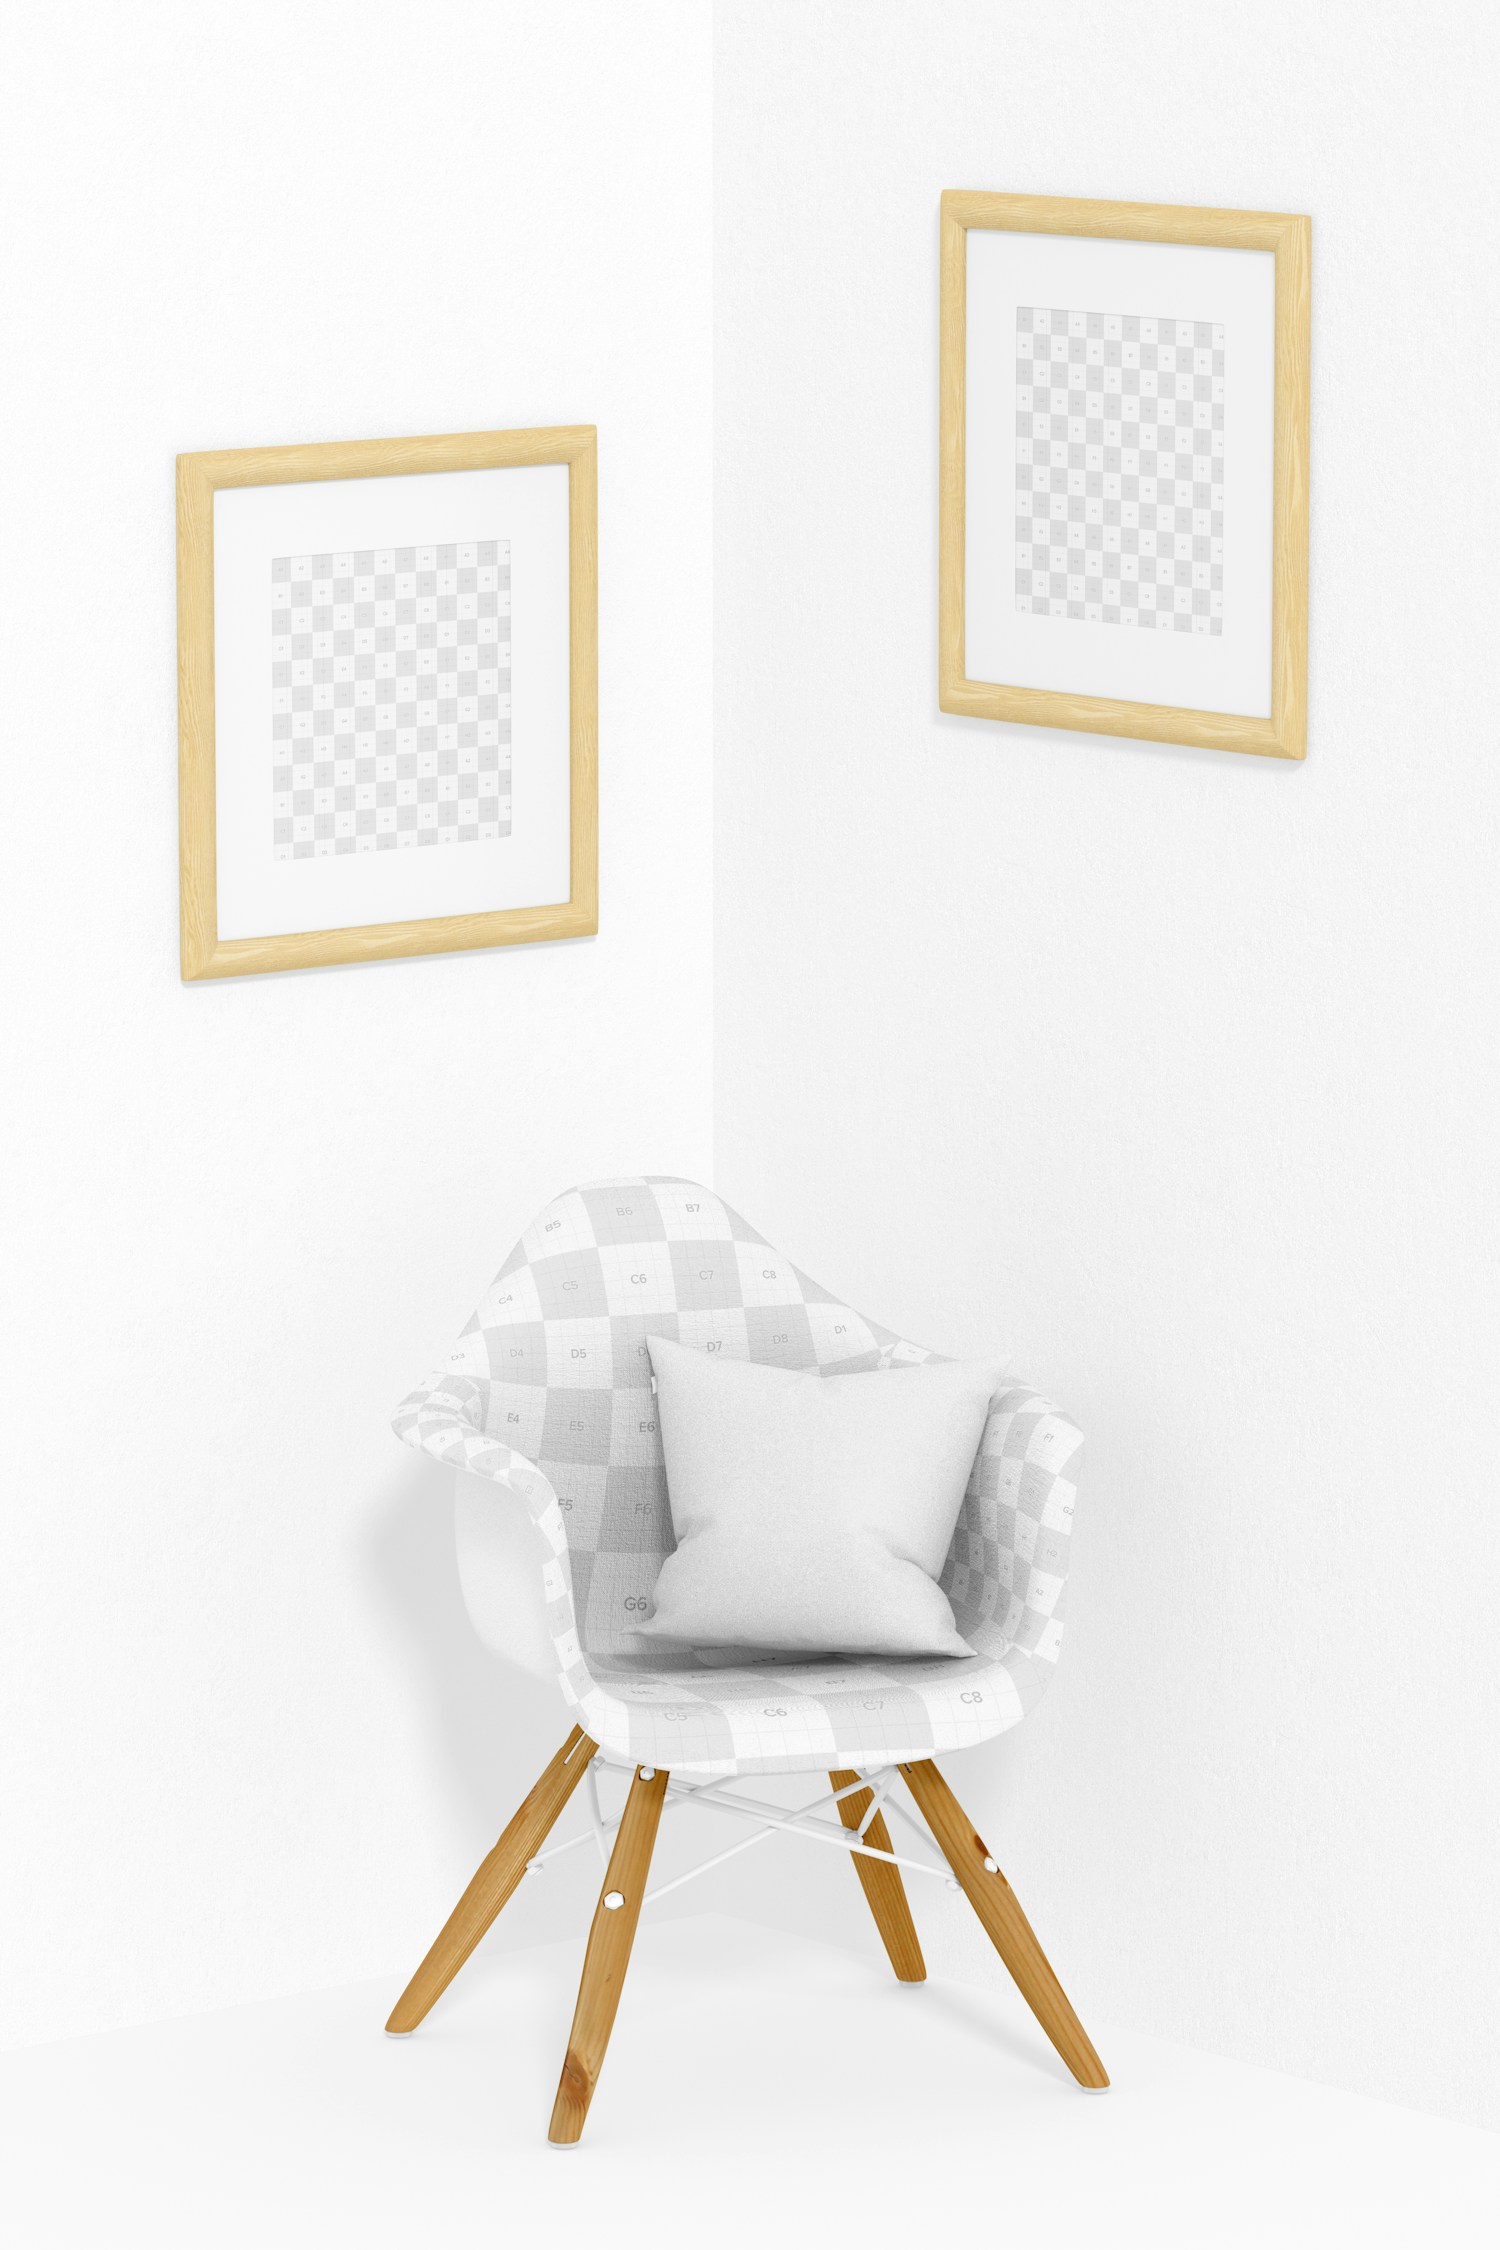 Square Frames with Fabric Chair Mockup, Perspective